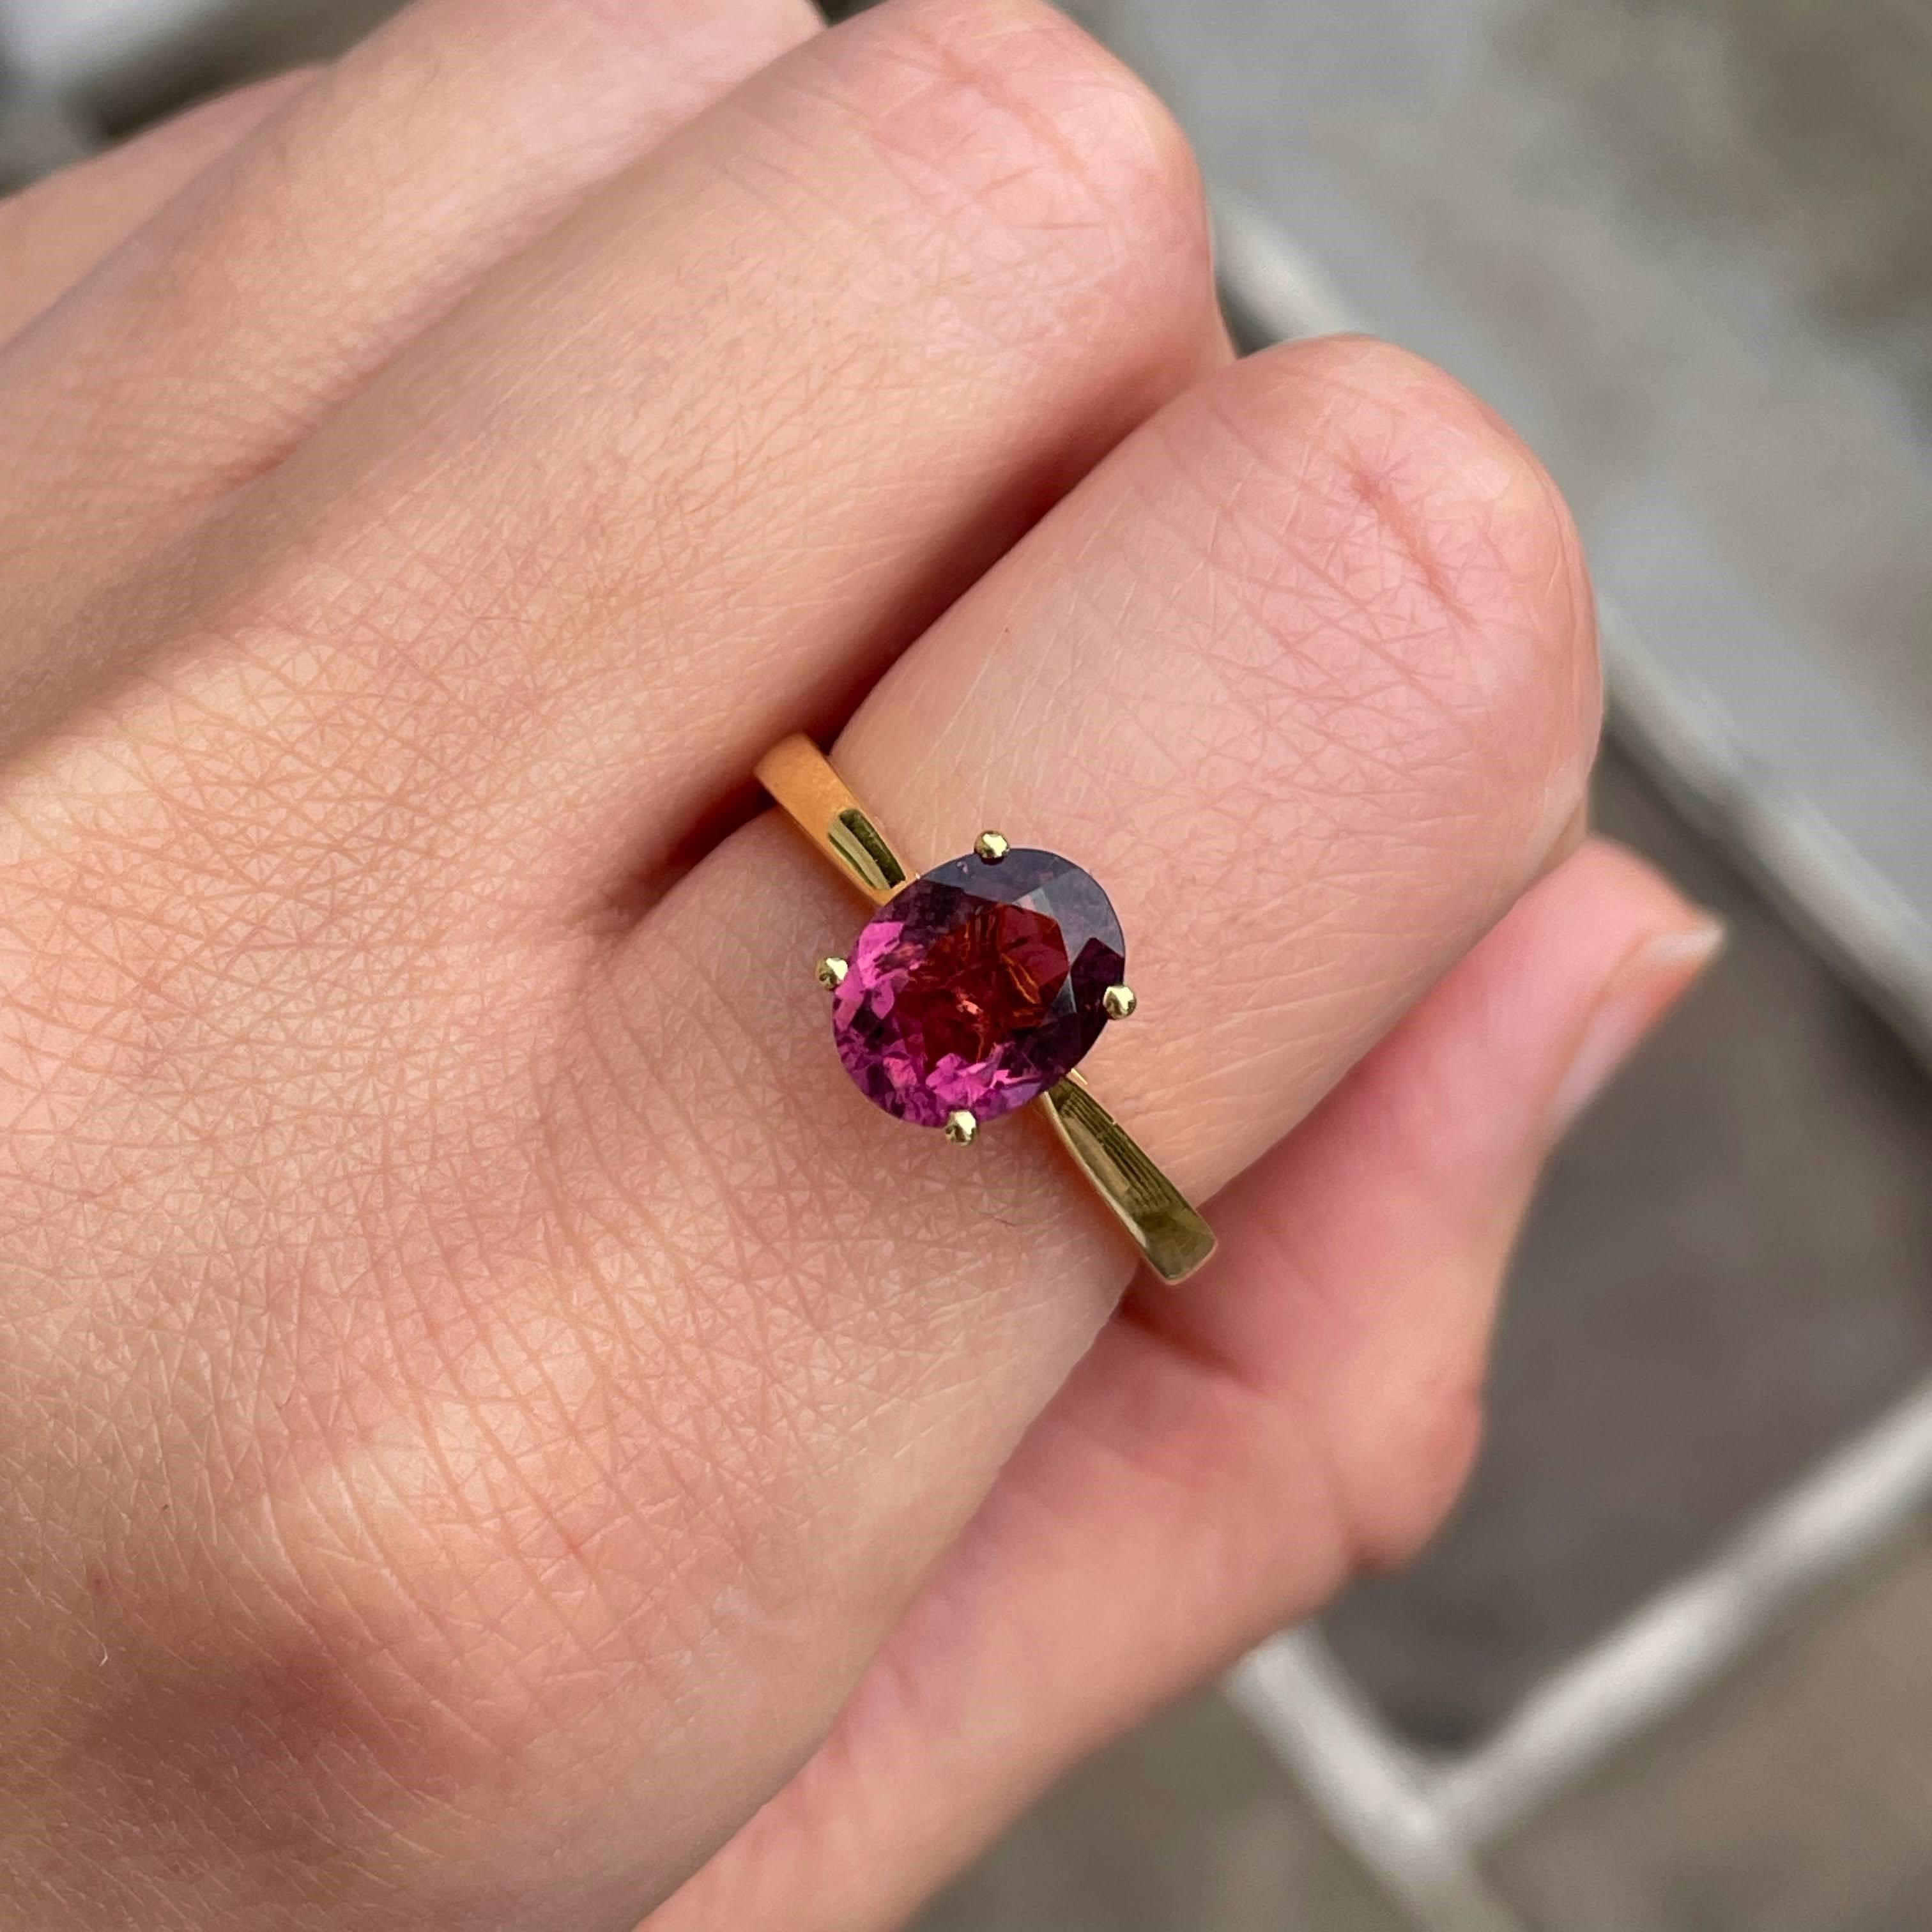 This rubellite ring is simple yet stunning. Featuring an oval cut deep colored center stone, this Rubellite ring is the epitome of elegant jewelry. Rubellite is the rarest of Tourmaline. An everyday stunner, this ring is one of our favorites in our